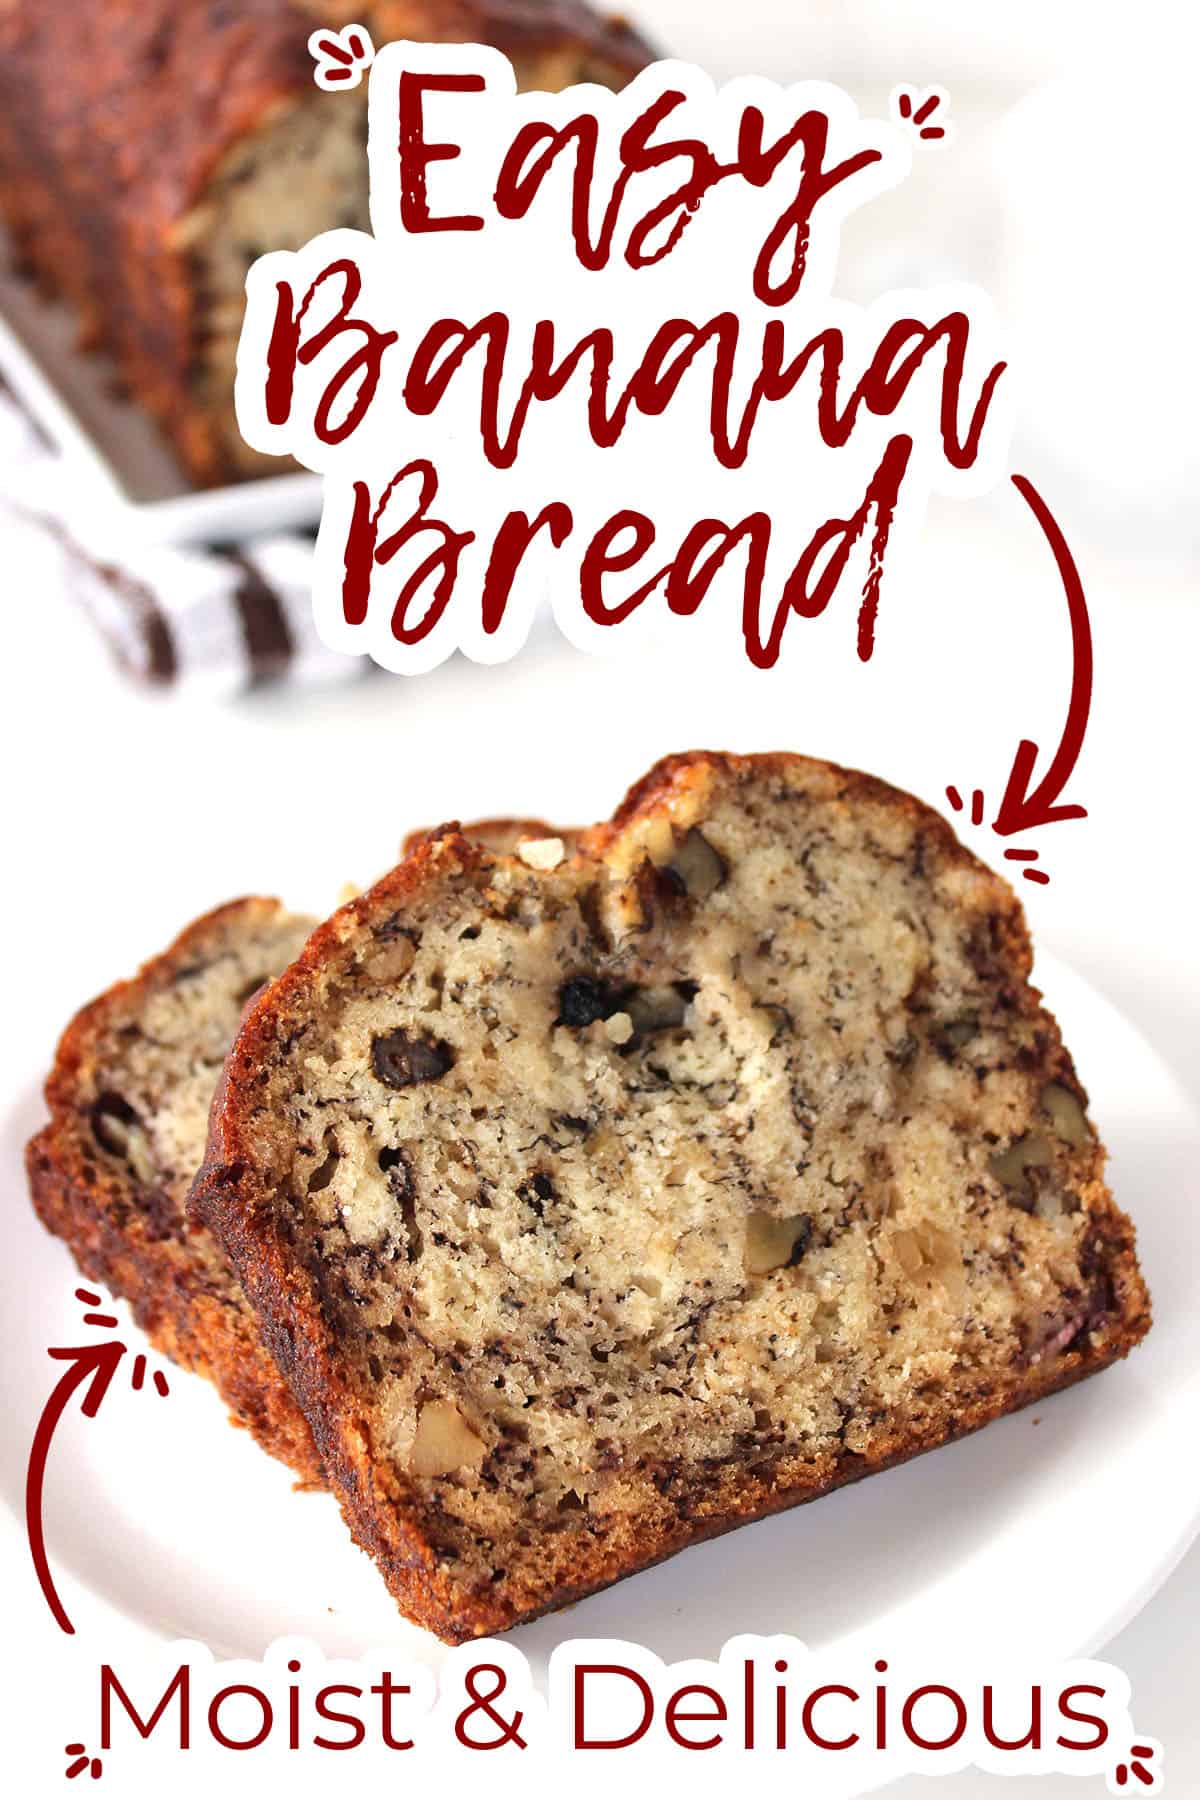 Text on image Banana Bread Moist and Delicious